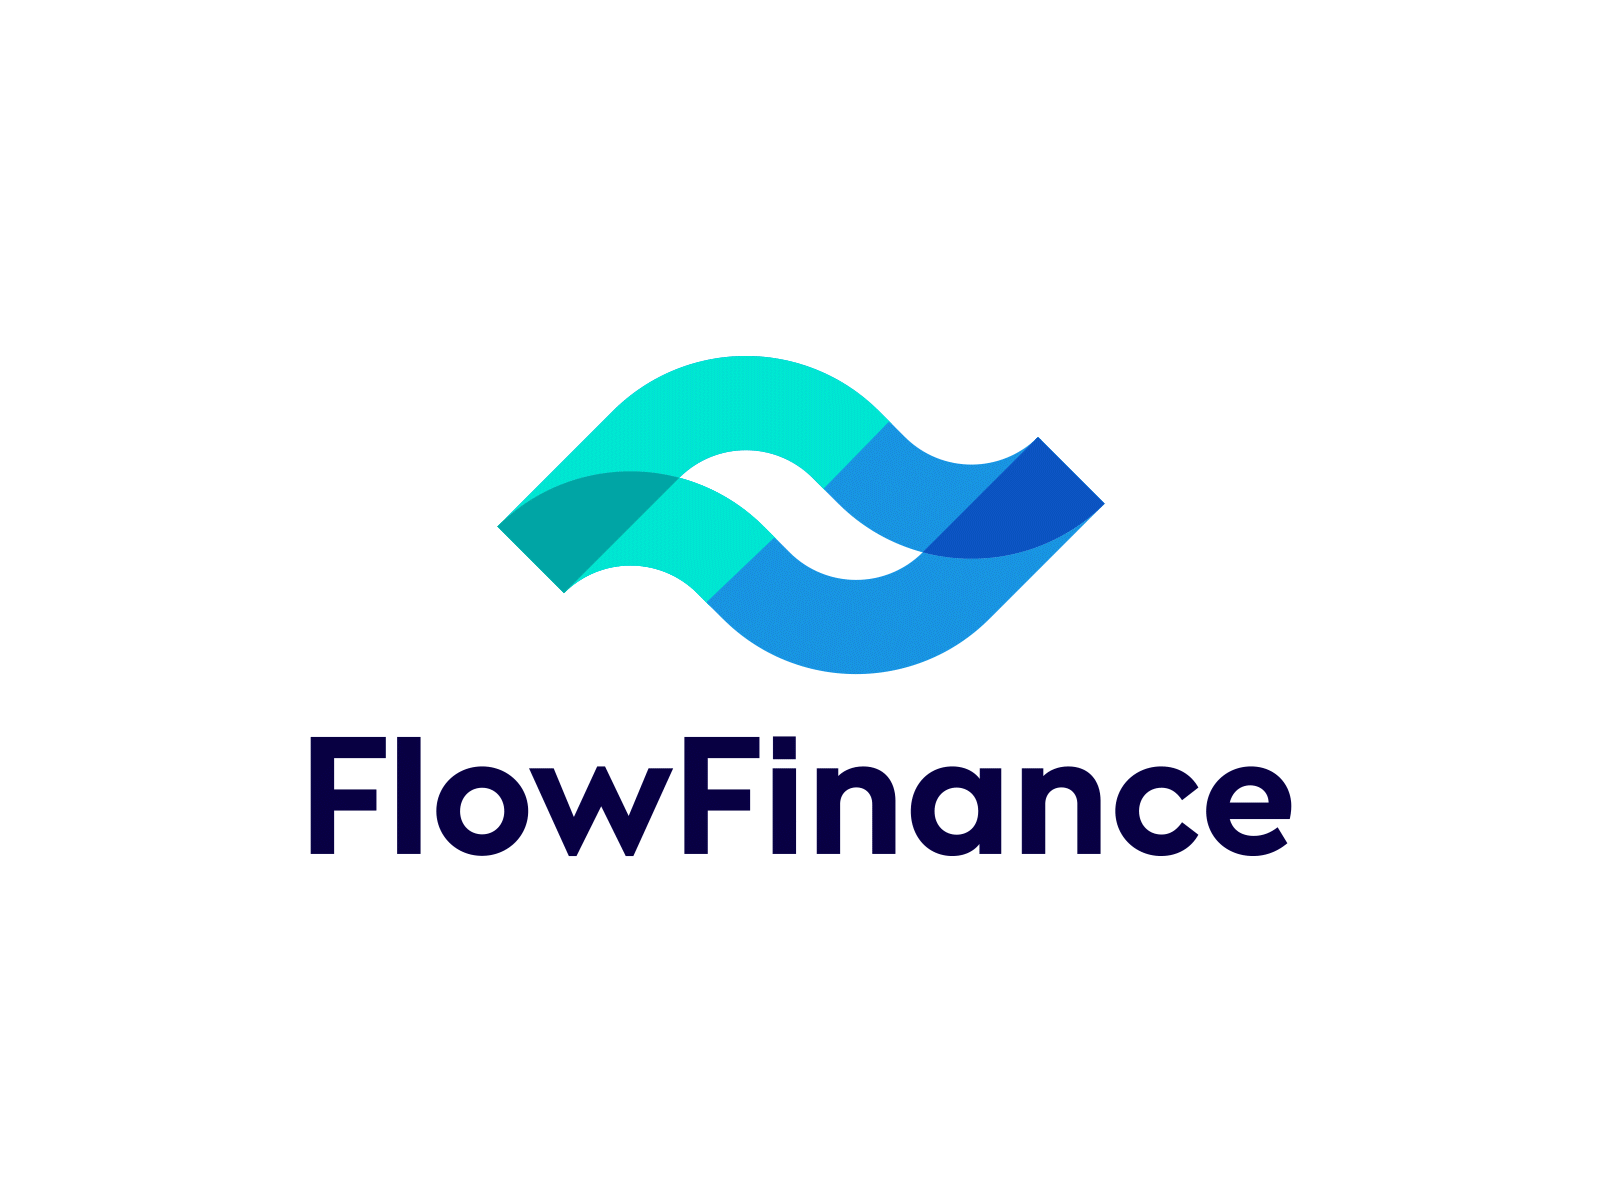 Flow Finance logo animation after effects motion evolution animation brand brands vadim carazan branding f monogram icon logos lines trend flowing up logo motion finance flow ff nature leaves fast speed ocean water fluid animated smooth currency crypto digital startup growth finance chart transfer deal negative space trustworthy trust fintech wave waves waving leaf